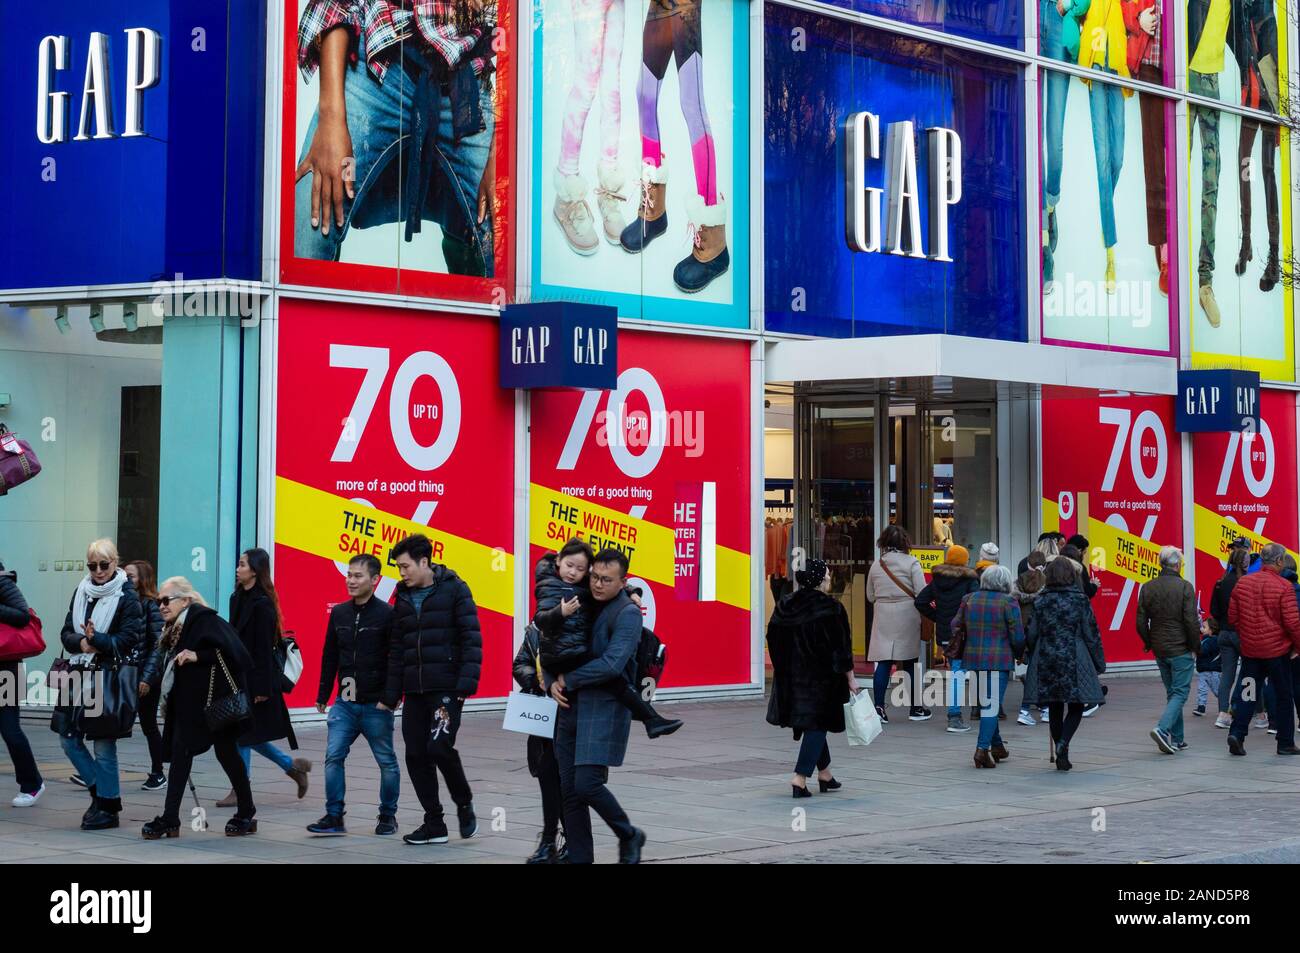 Oxford Street London retail shoppers people walking past the GAP department store colourful shopfront offering 70% sale discount as seen in January 2020 in Oxford Street, London, UK Stock Photo